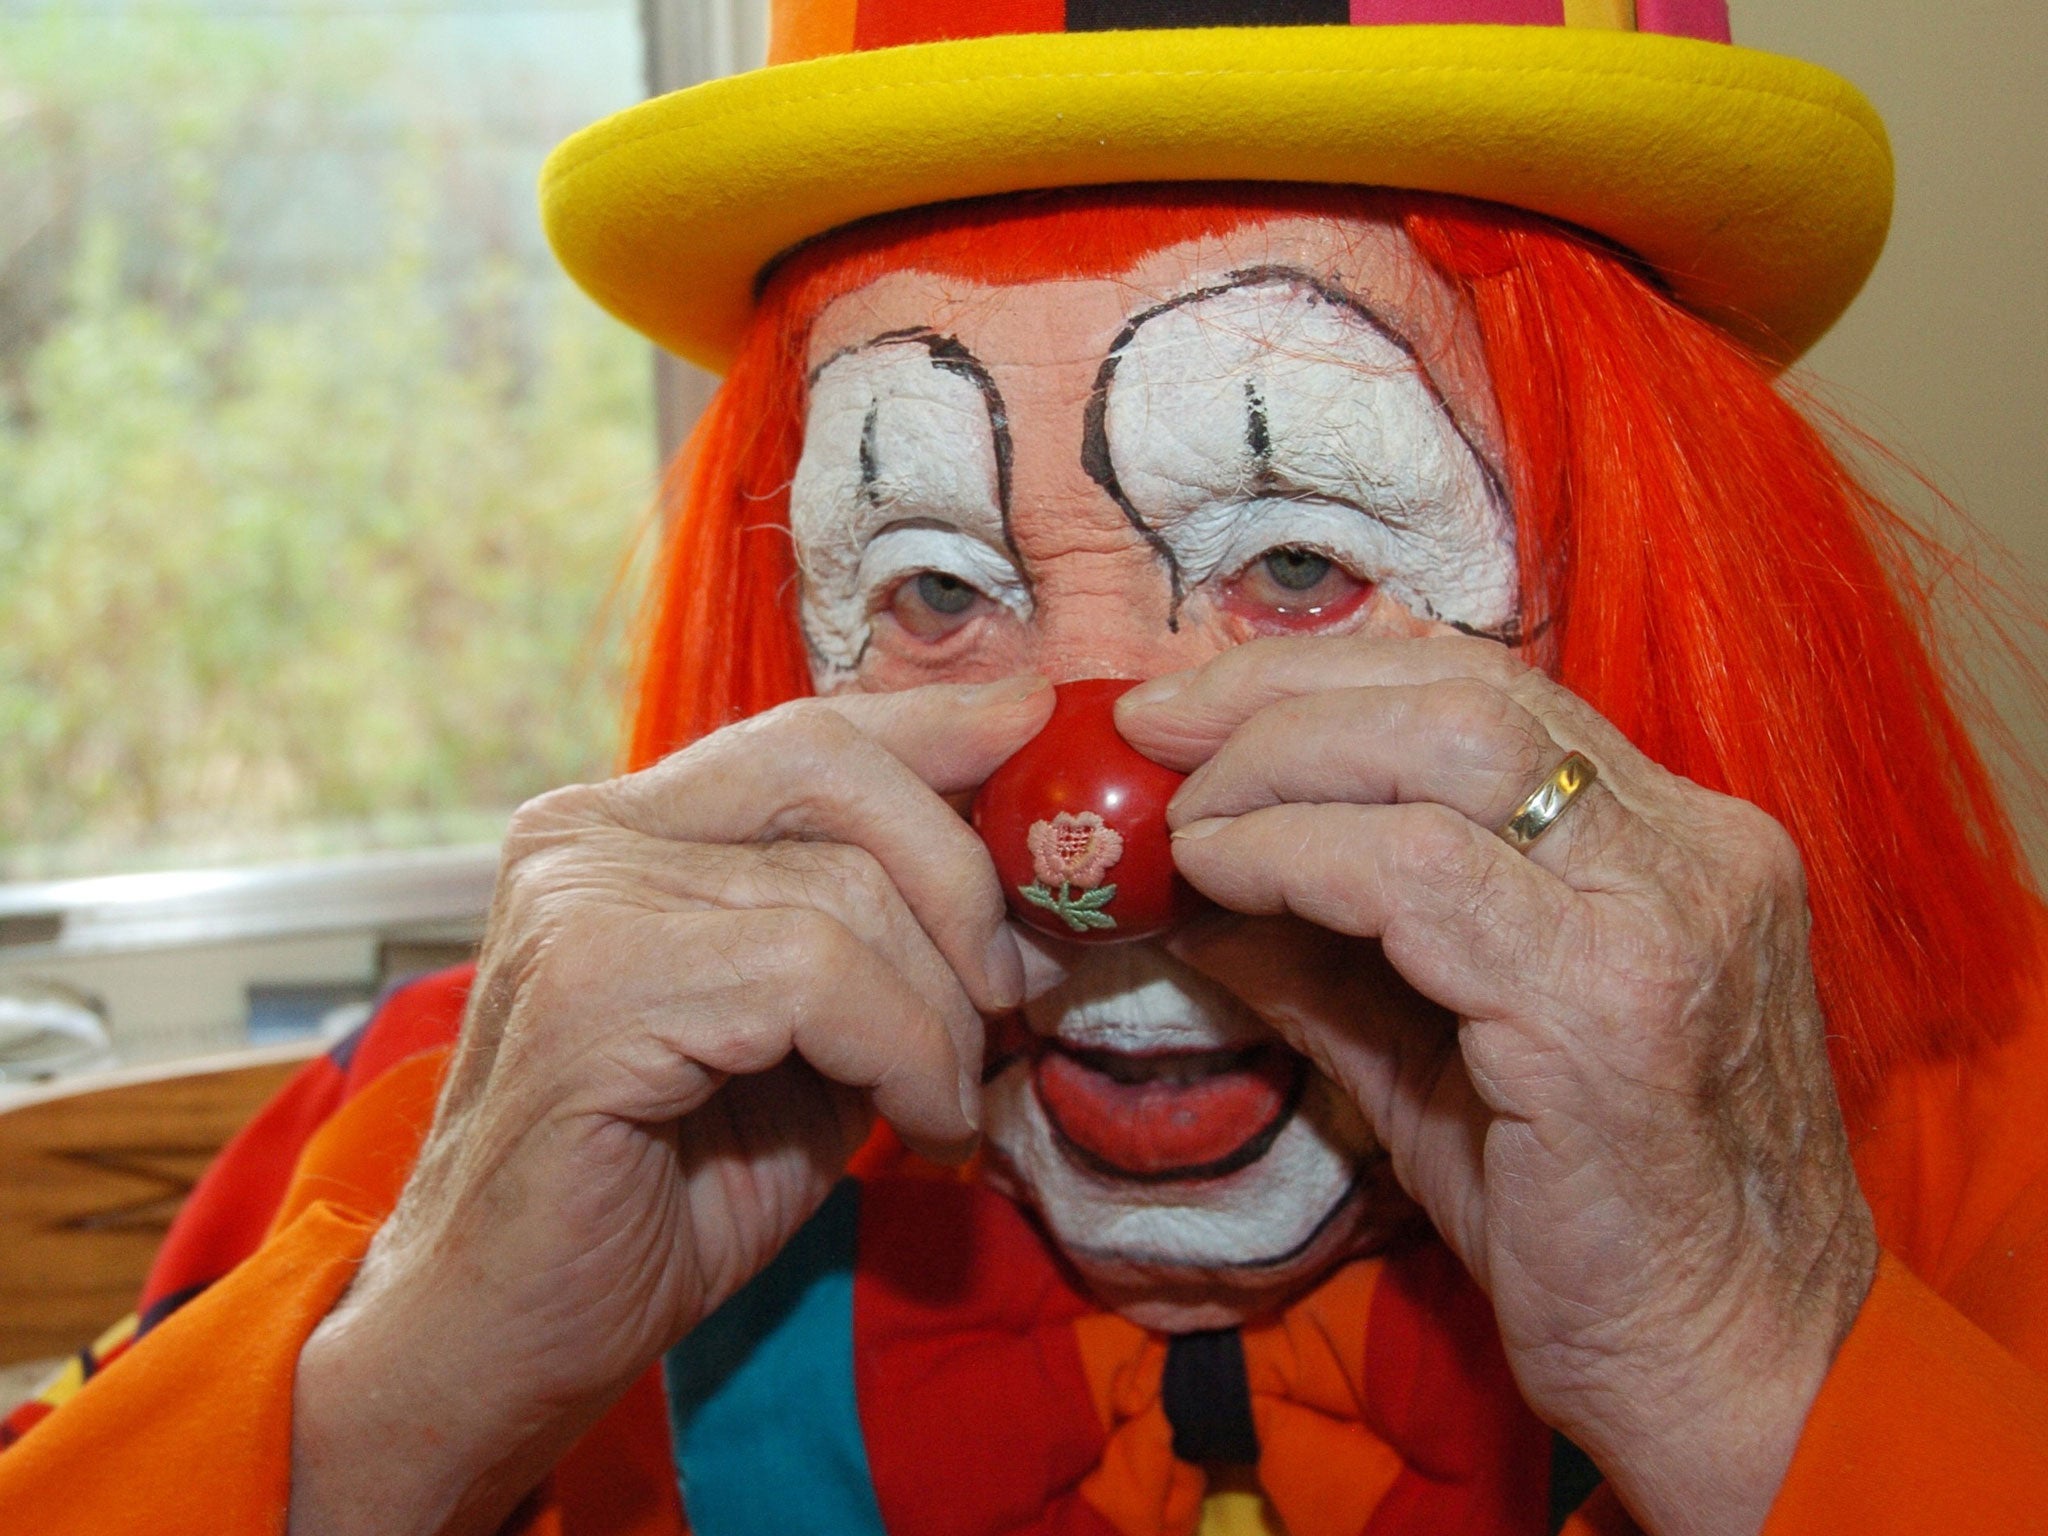 Floyd "Creeky" Creekmore, the world’s oldest performing clown, has died at the age of 98